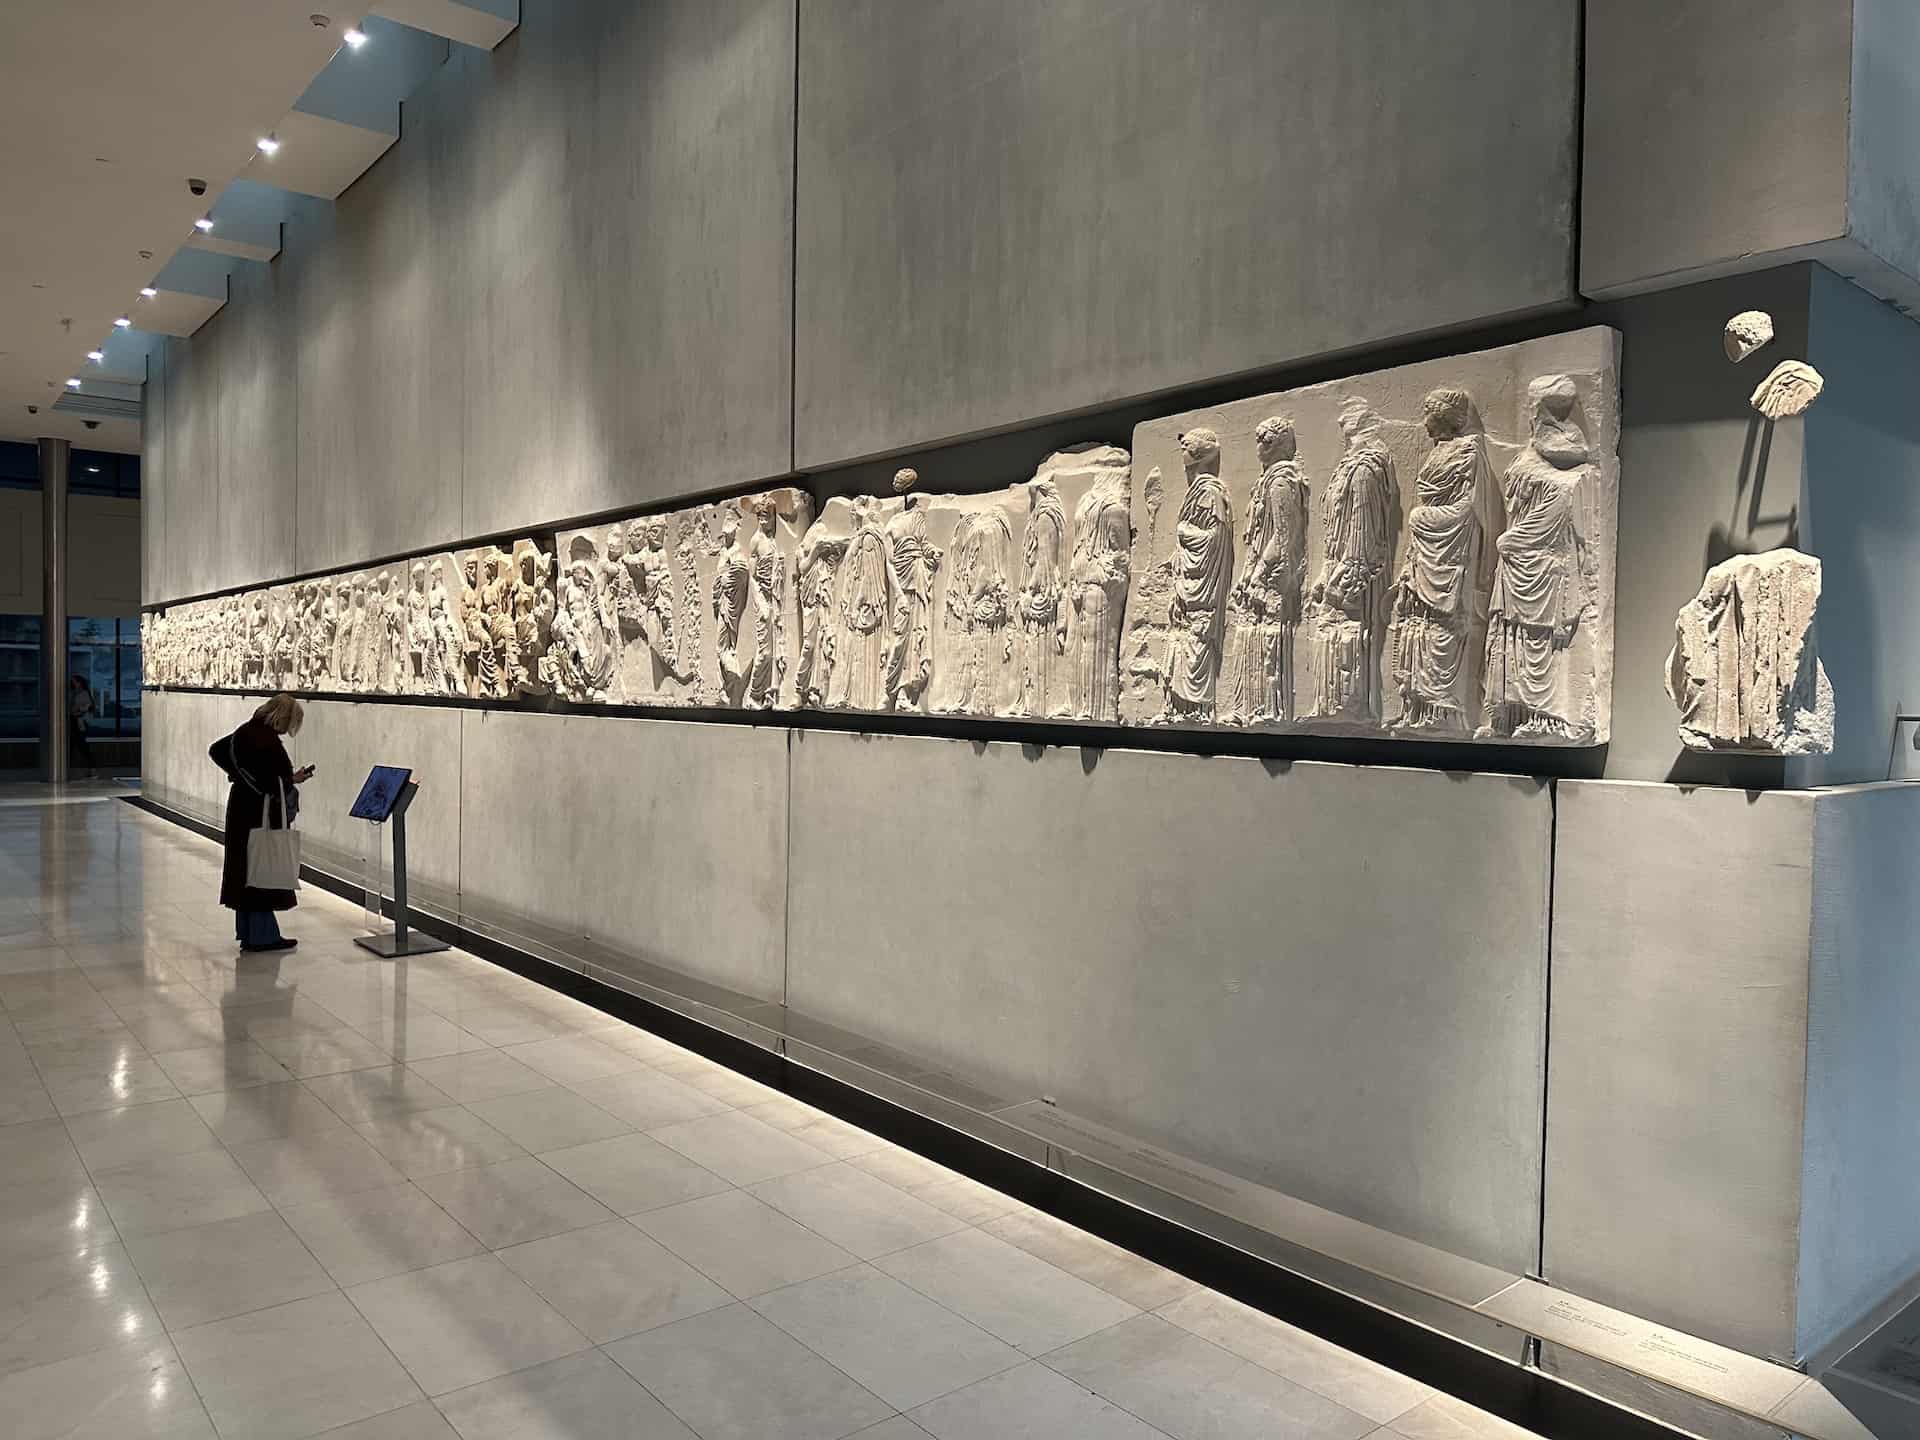 East frieze of the Parthenon at the Acropolis Museum in Athens, Greece